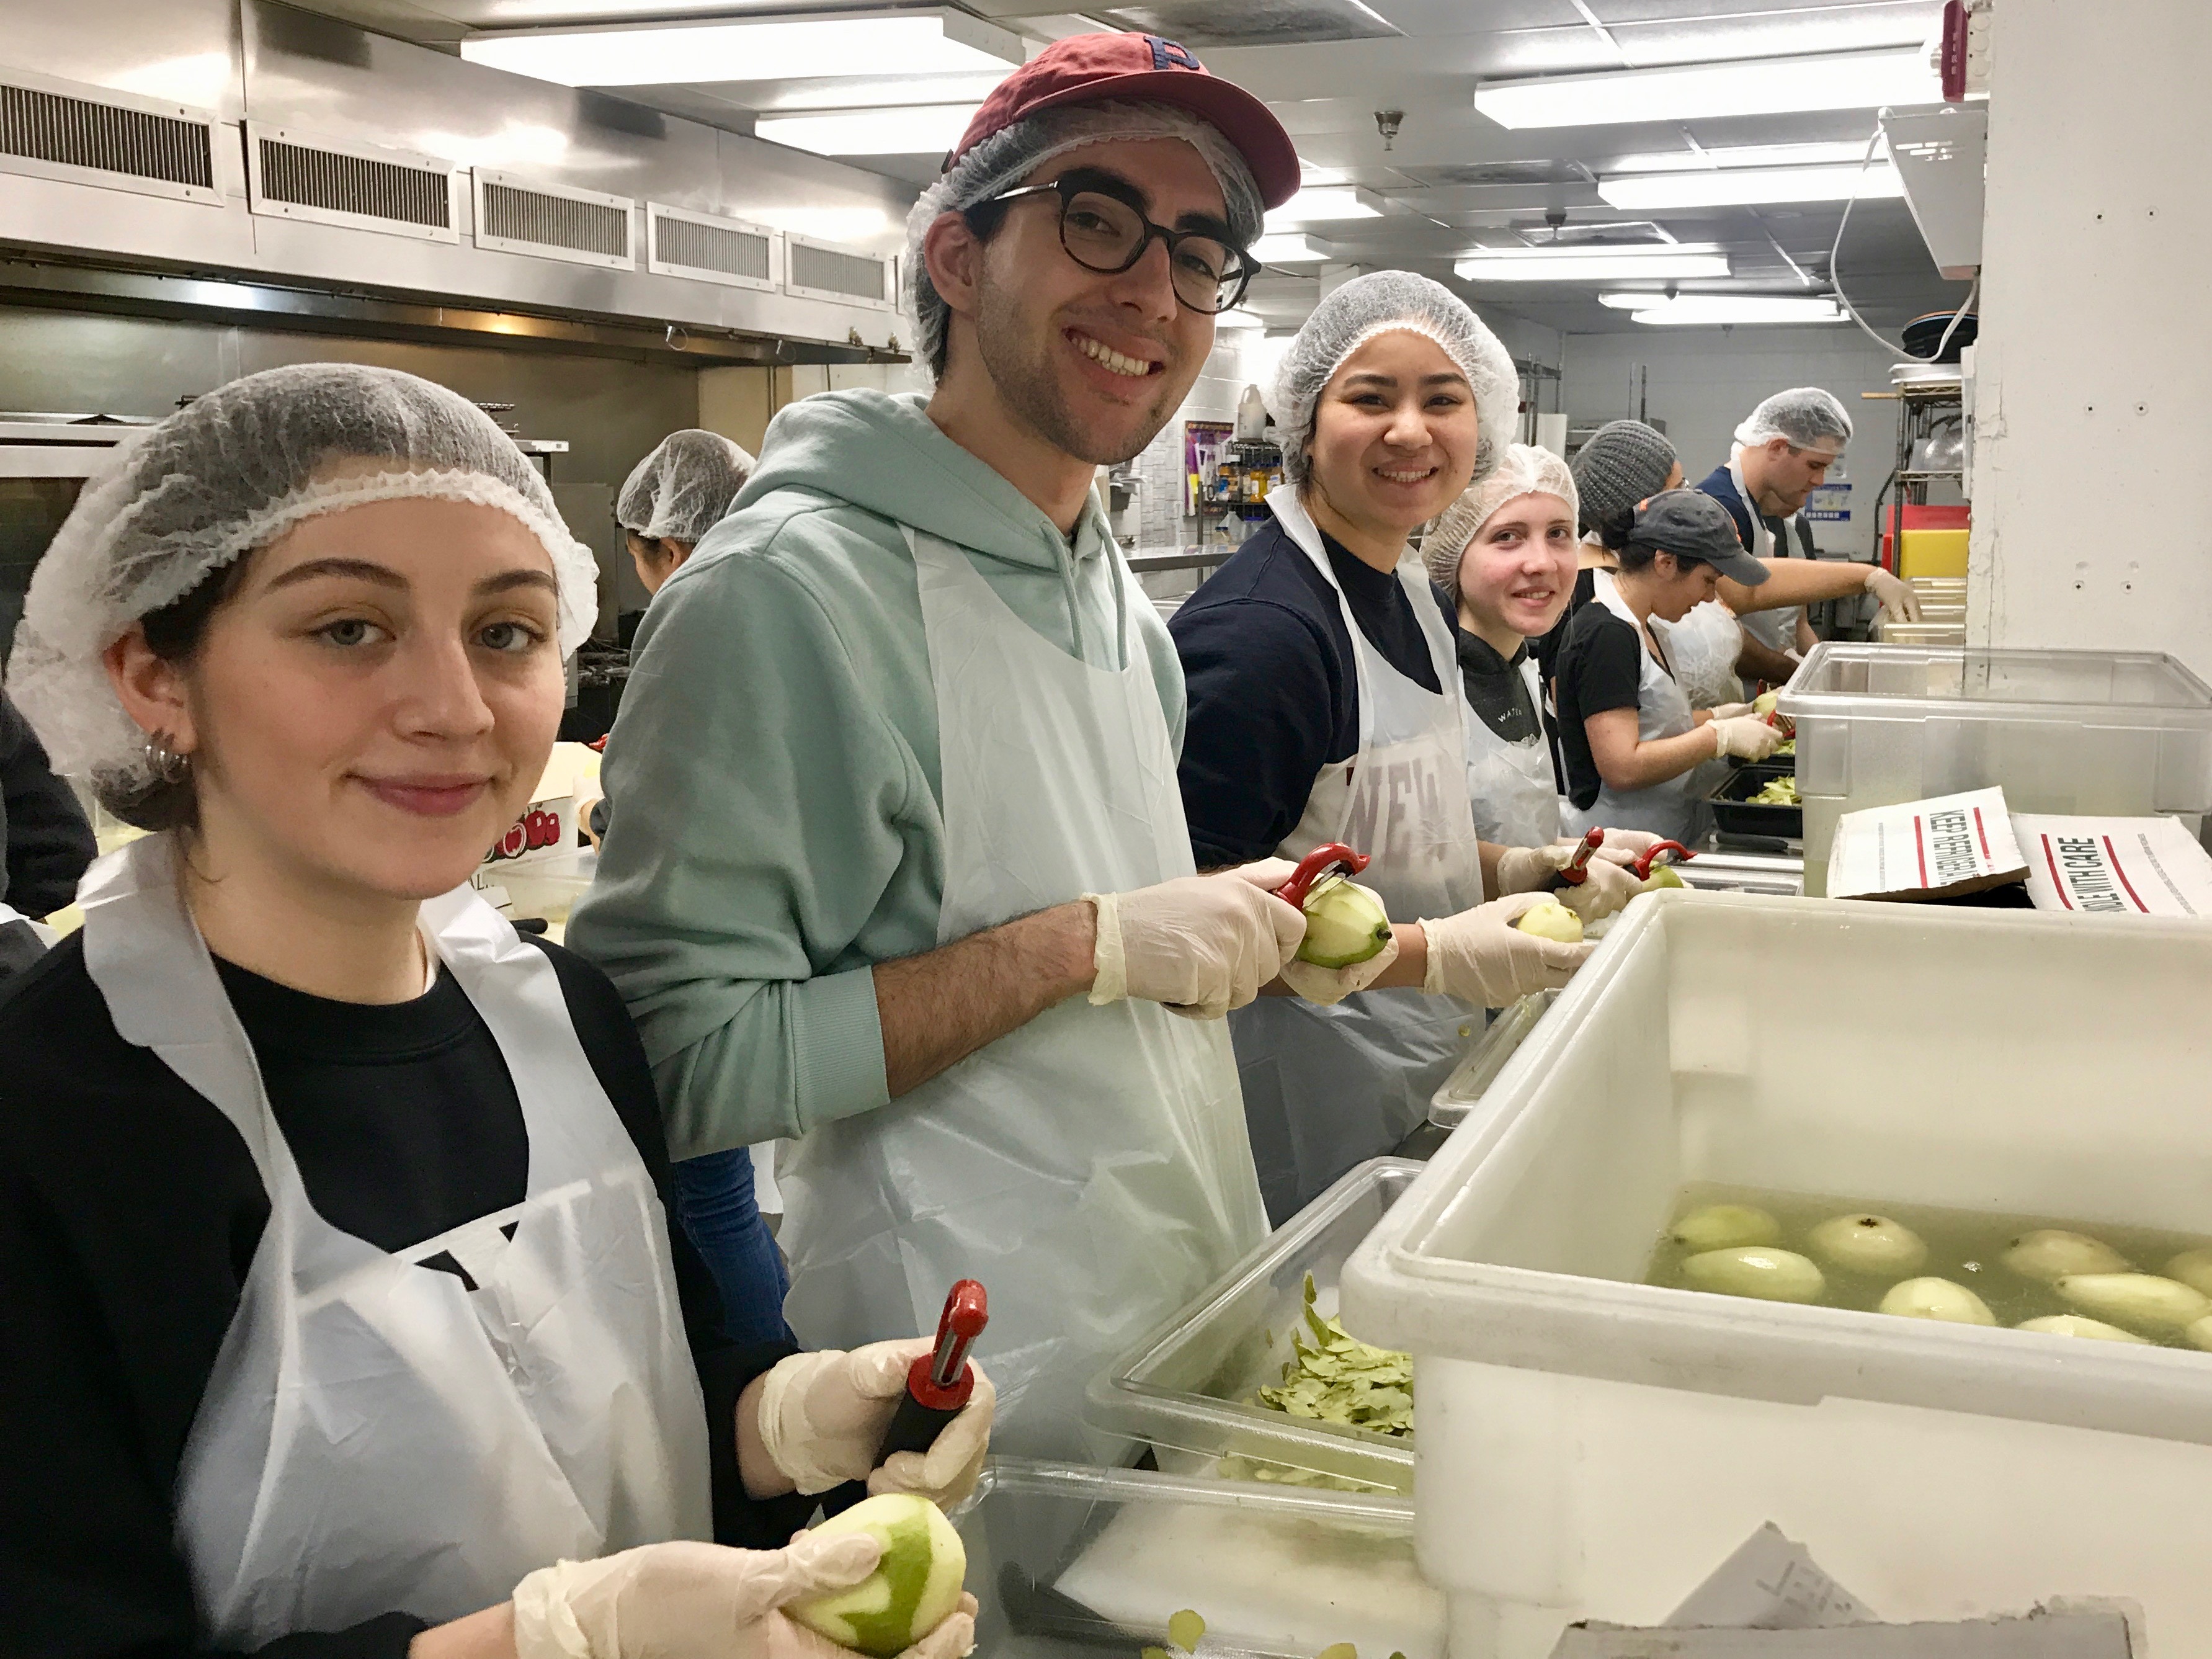 Four students with hairnets and aprons and gloves peeling apples in a kitchen.